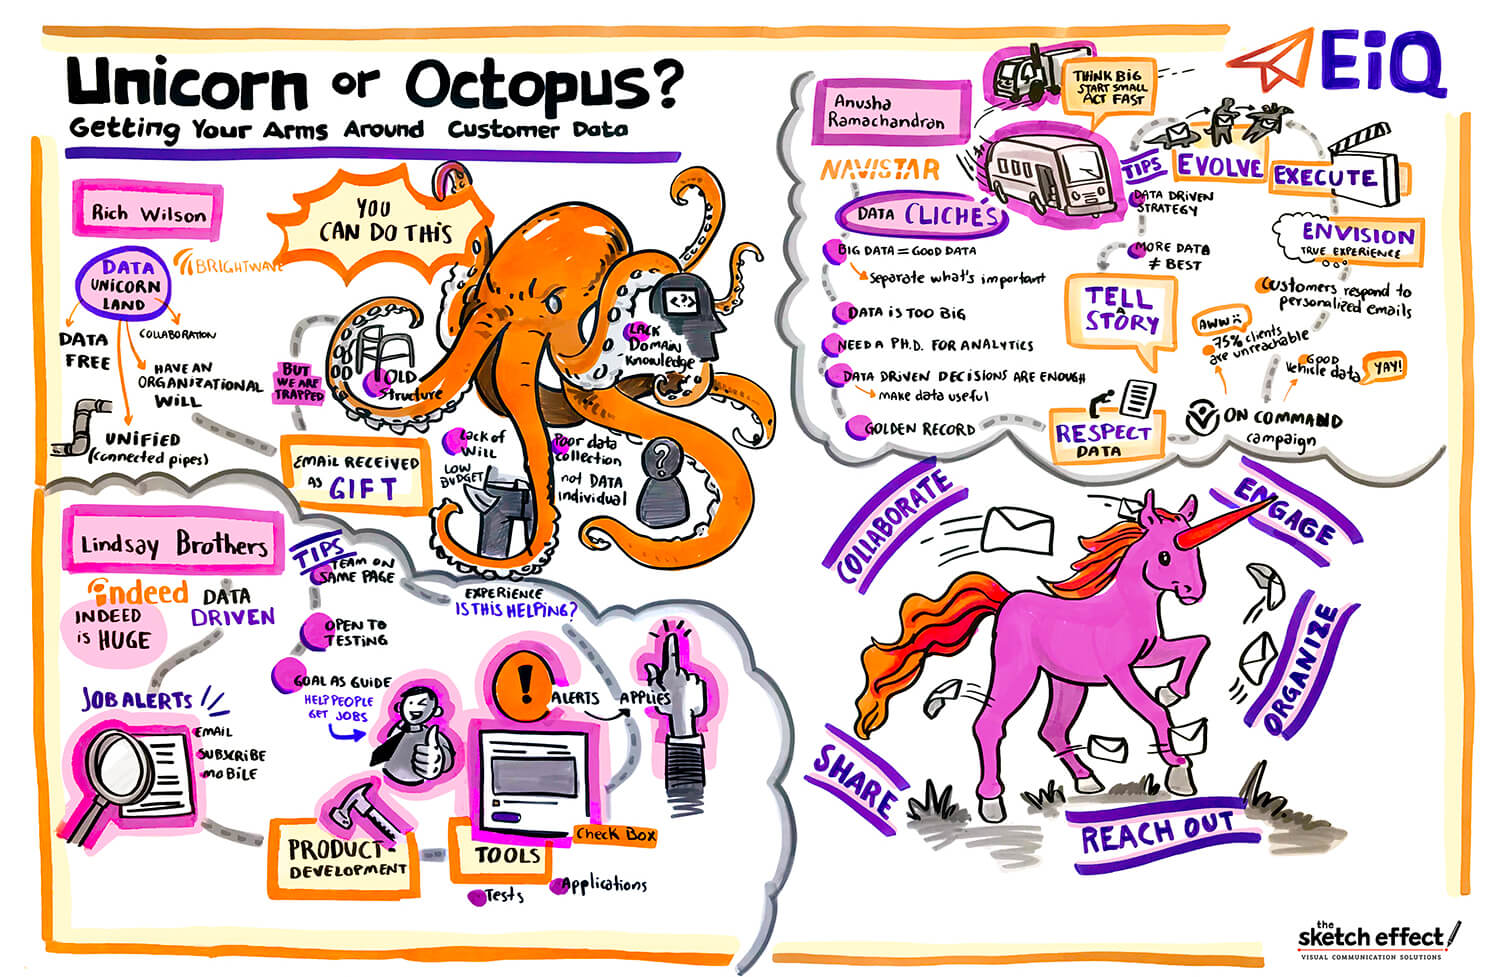 Graphic recording by The Sketch Effect titled "Unicorn or Octopus?" created for EIQ